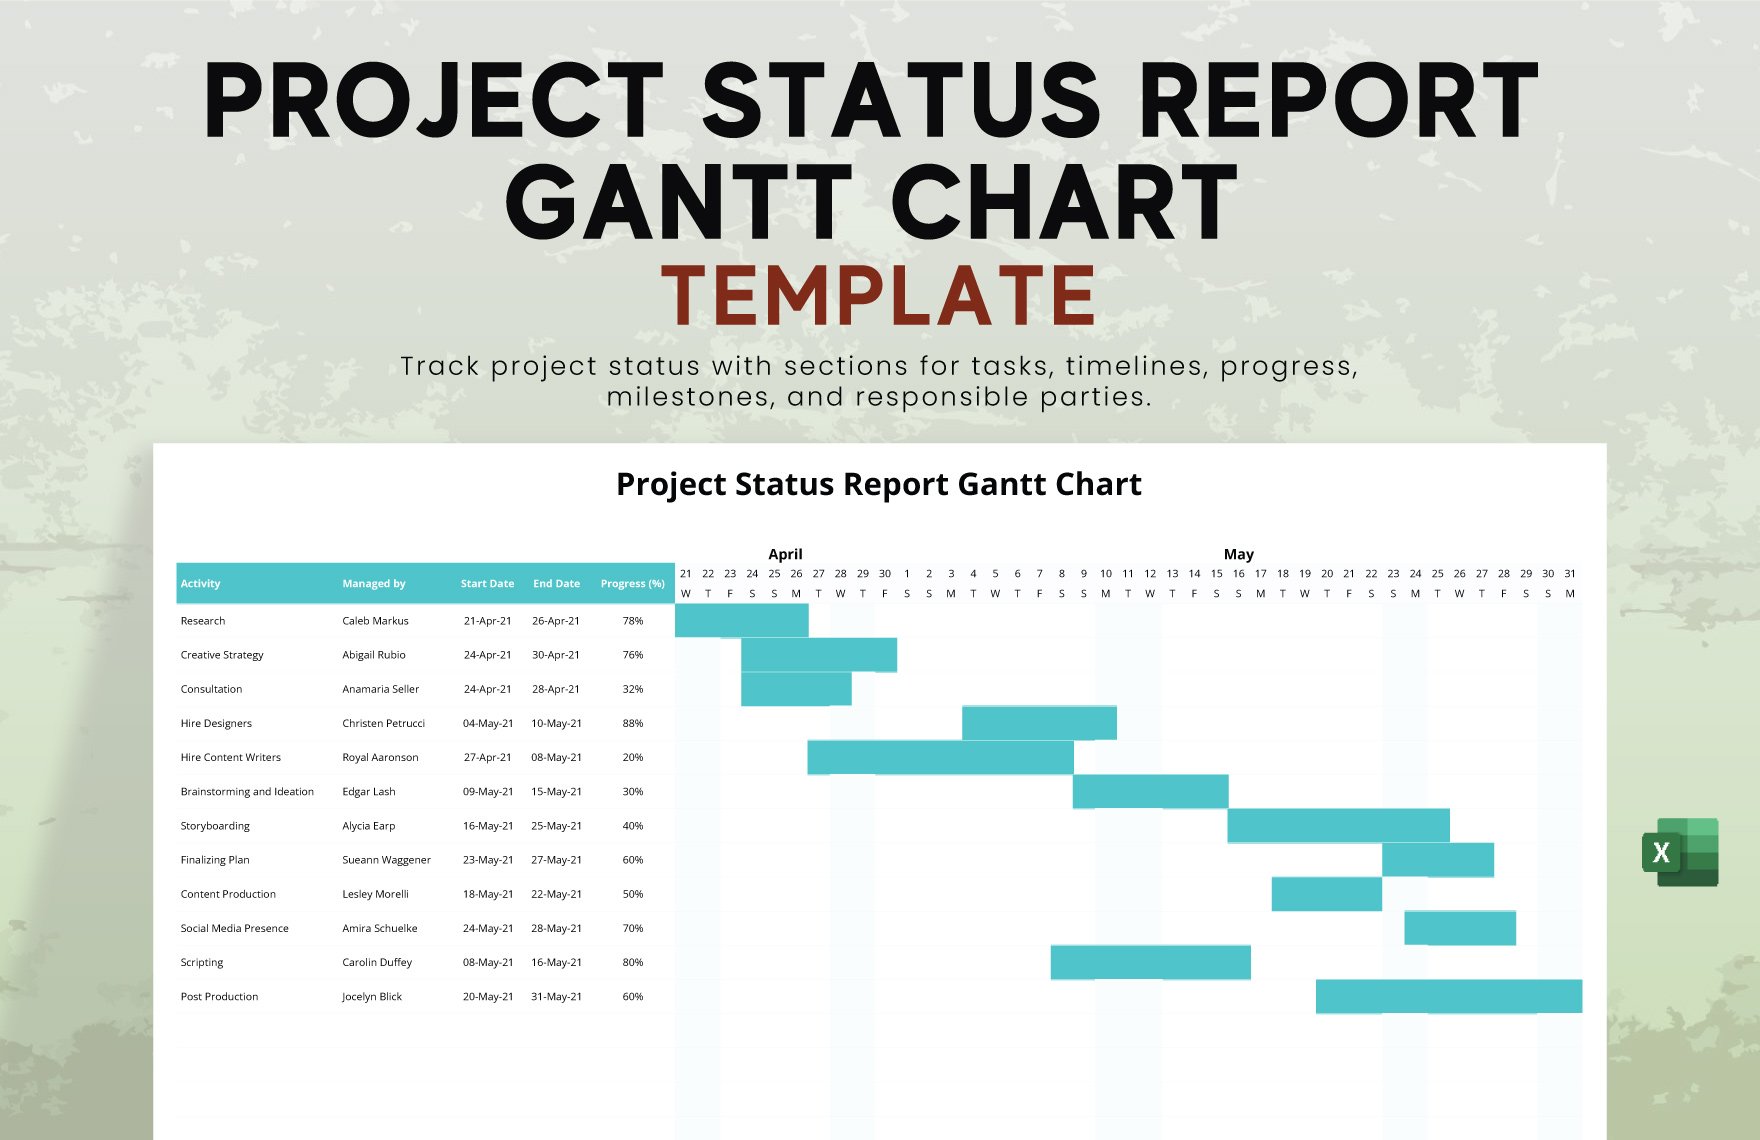 Project Status Report Gantt Chart Template in Excel